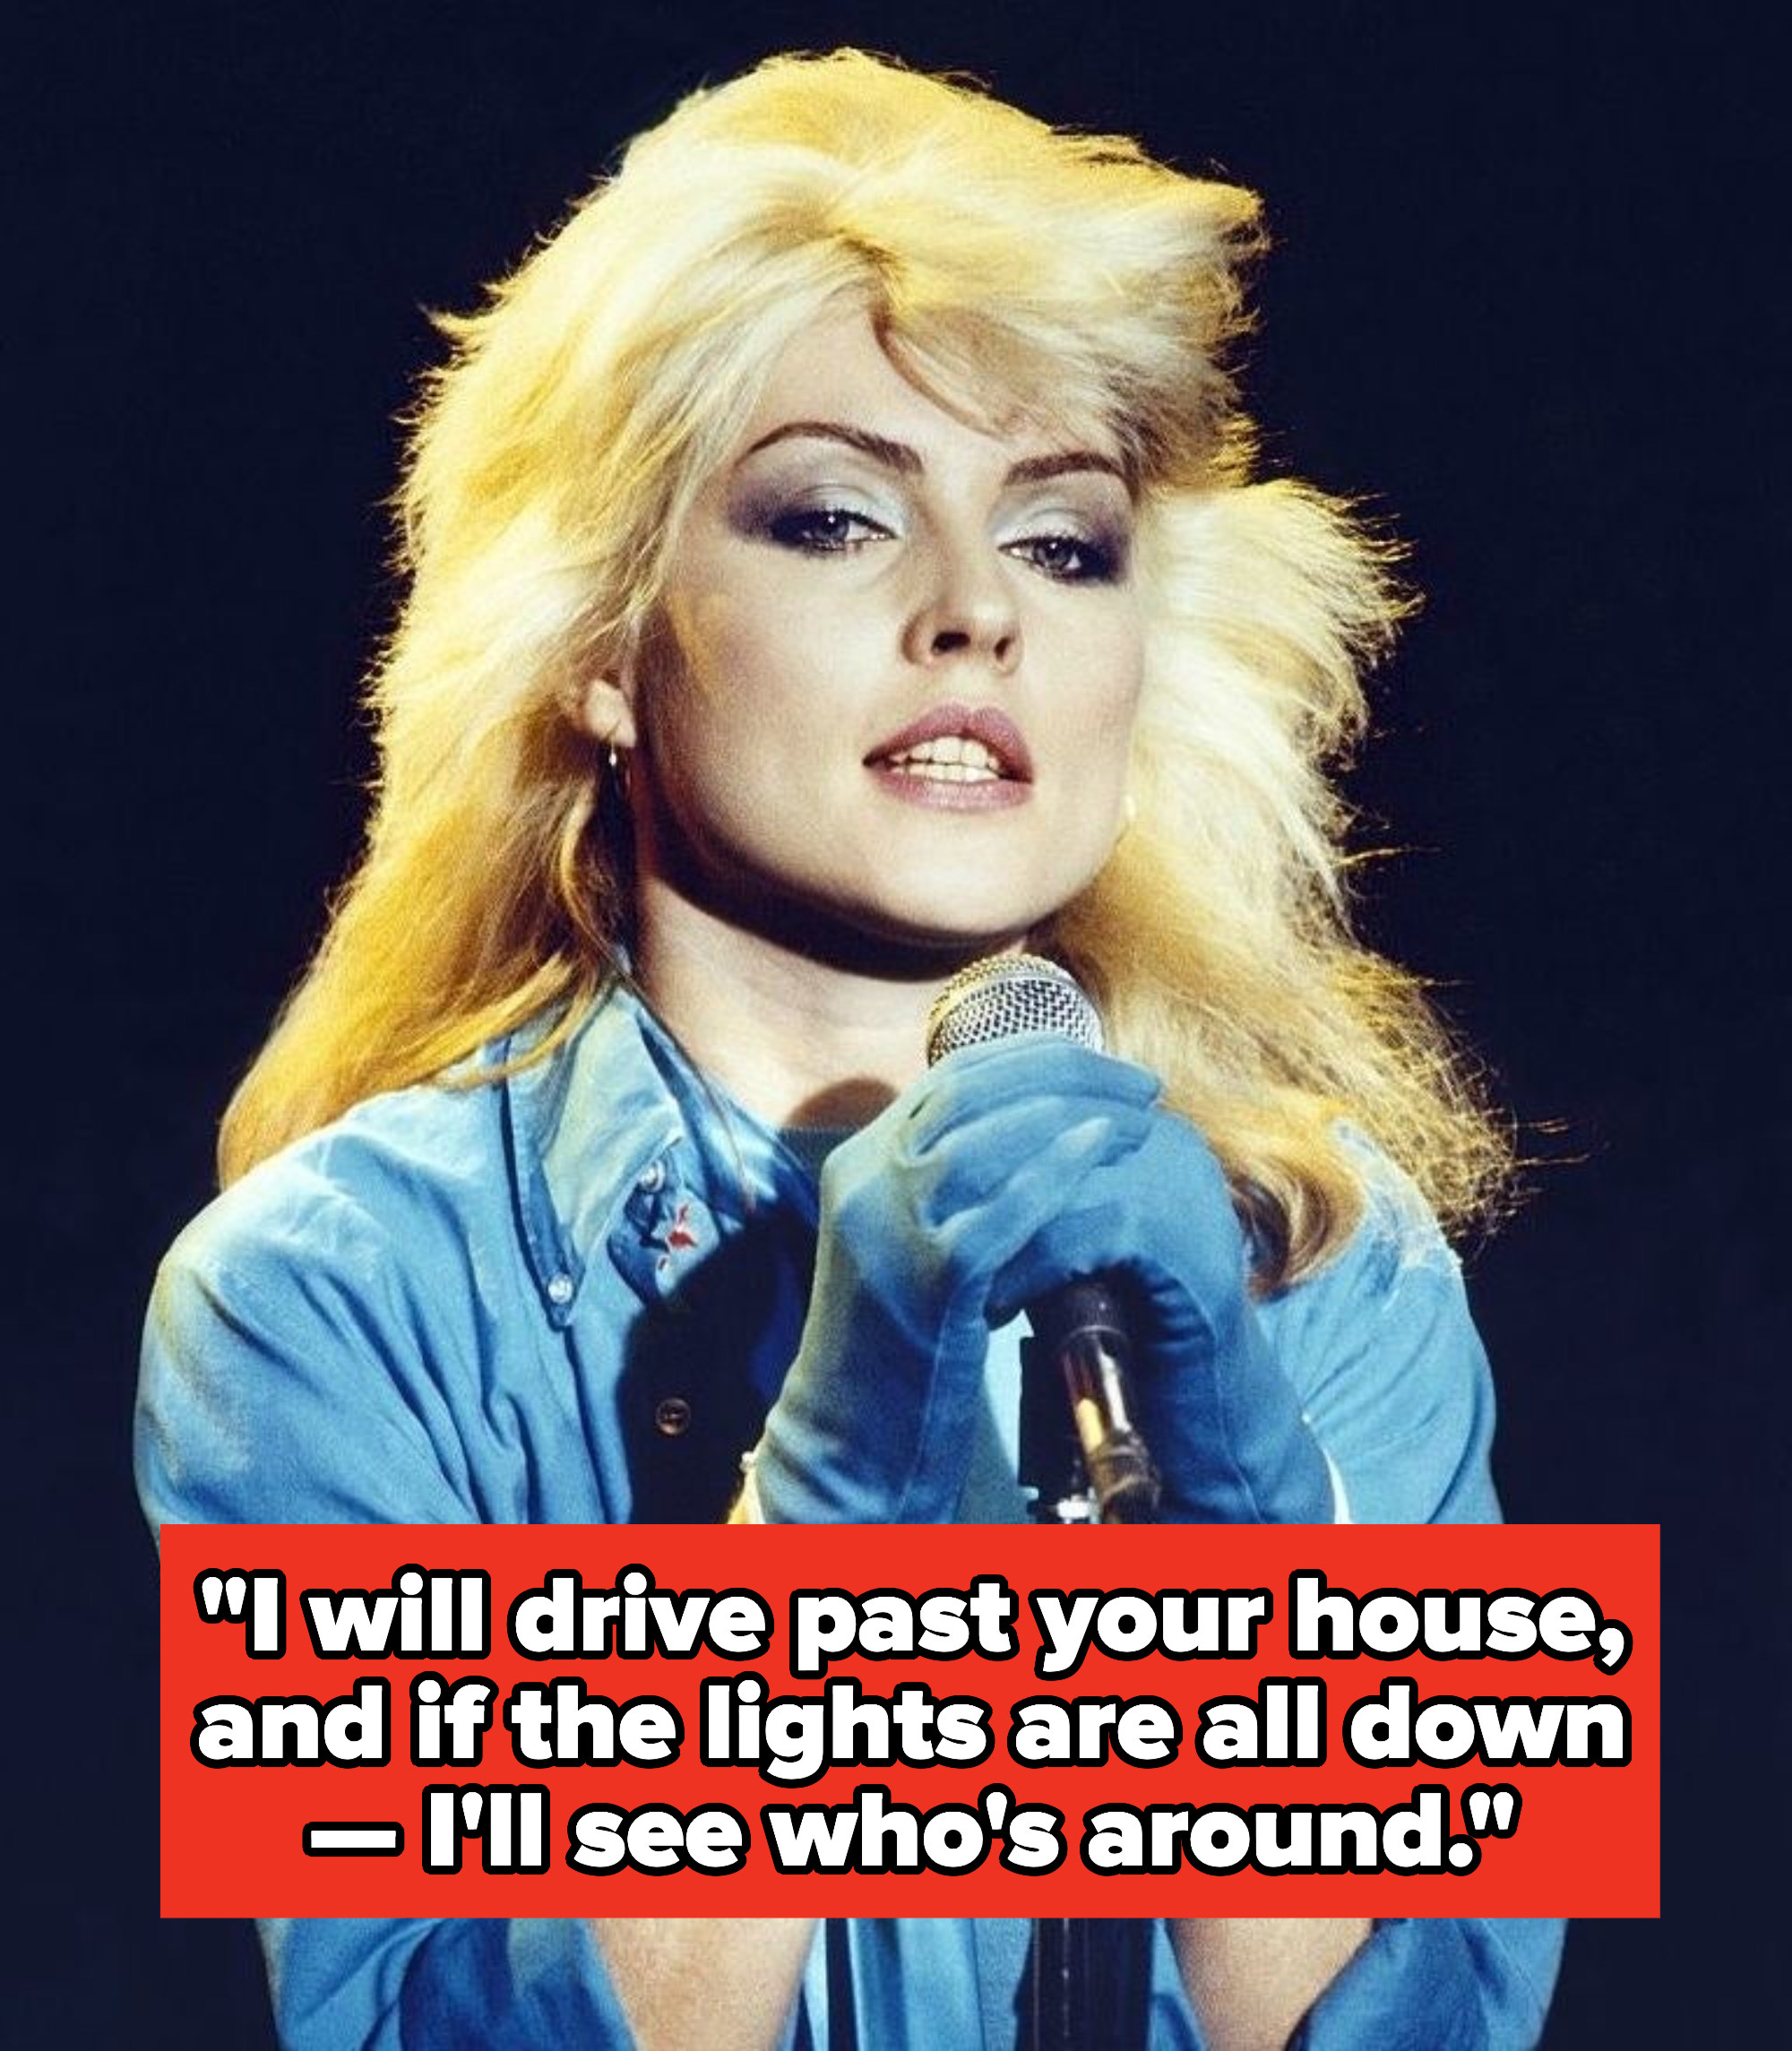 Blondie lyrics: &quot;I will drive past your house, and if the lights are all down — I&#x27;ll see who&#x27;s around&quot;